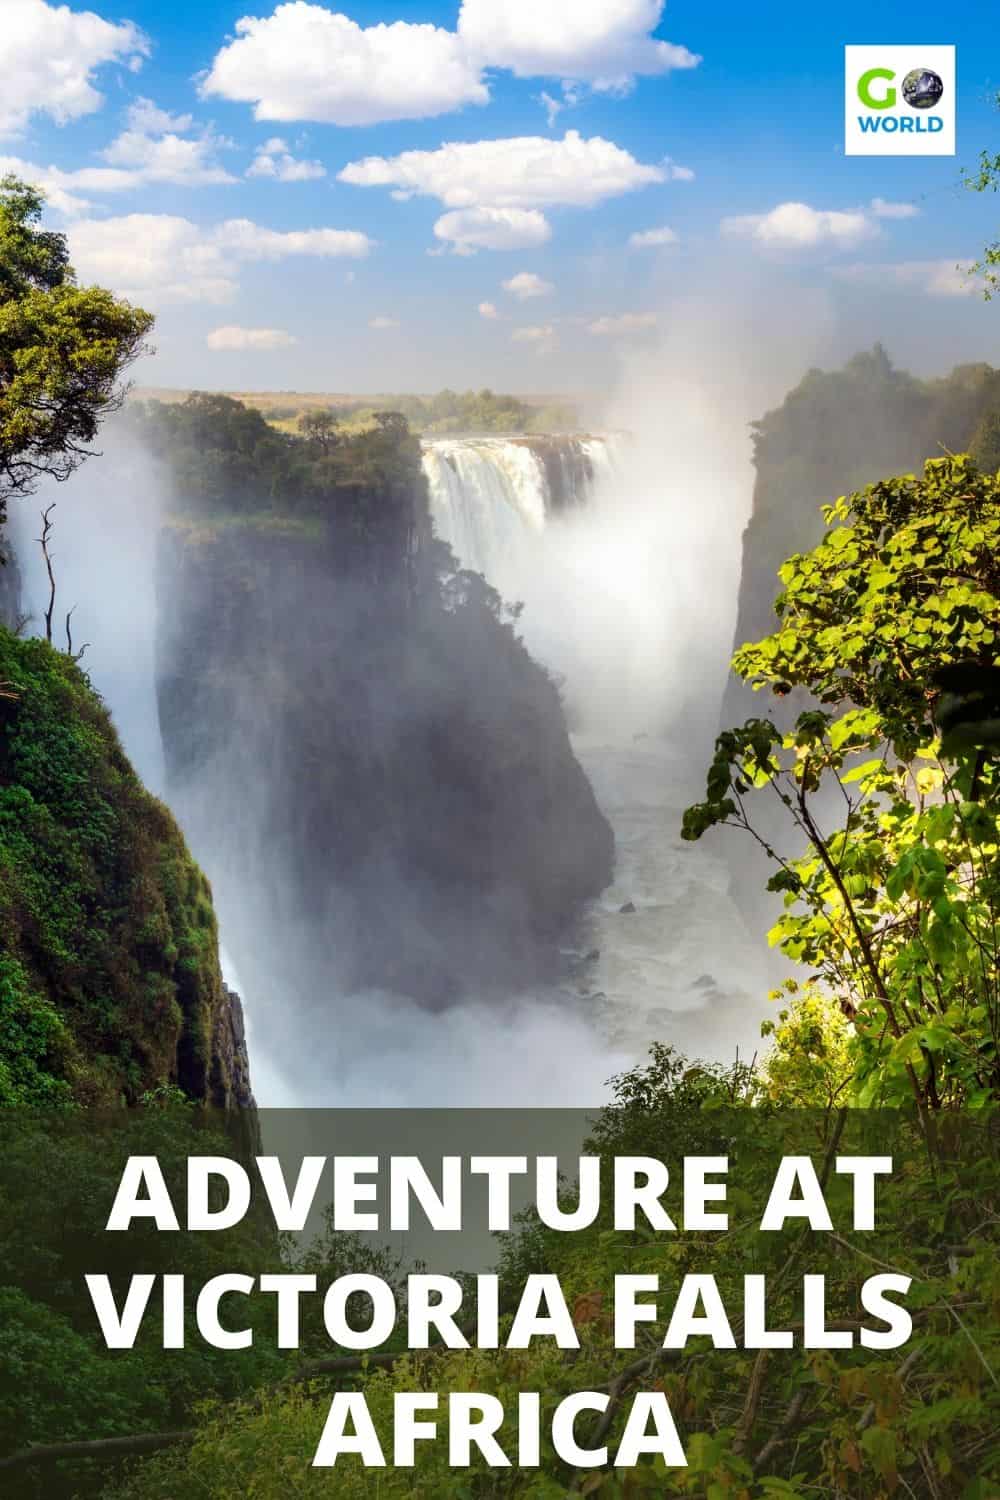 Activities in Victoria Falls range from a death-defying swim in the Devil's Pool to spotting wildlife on a Zambezi River sunset cruise. #victoriafalls #africa 